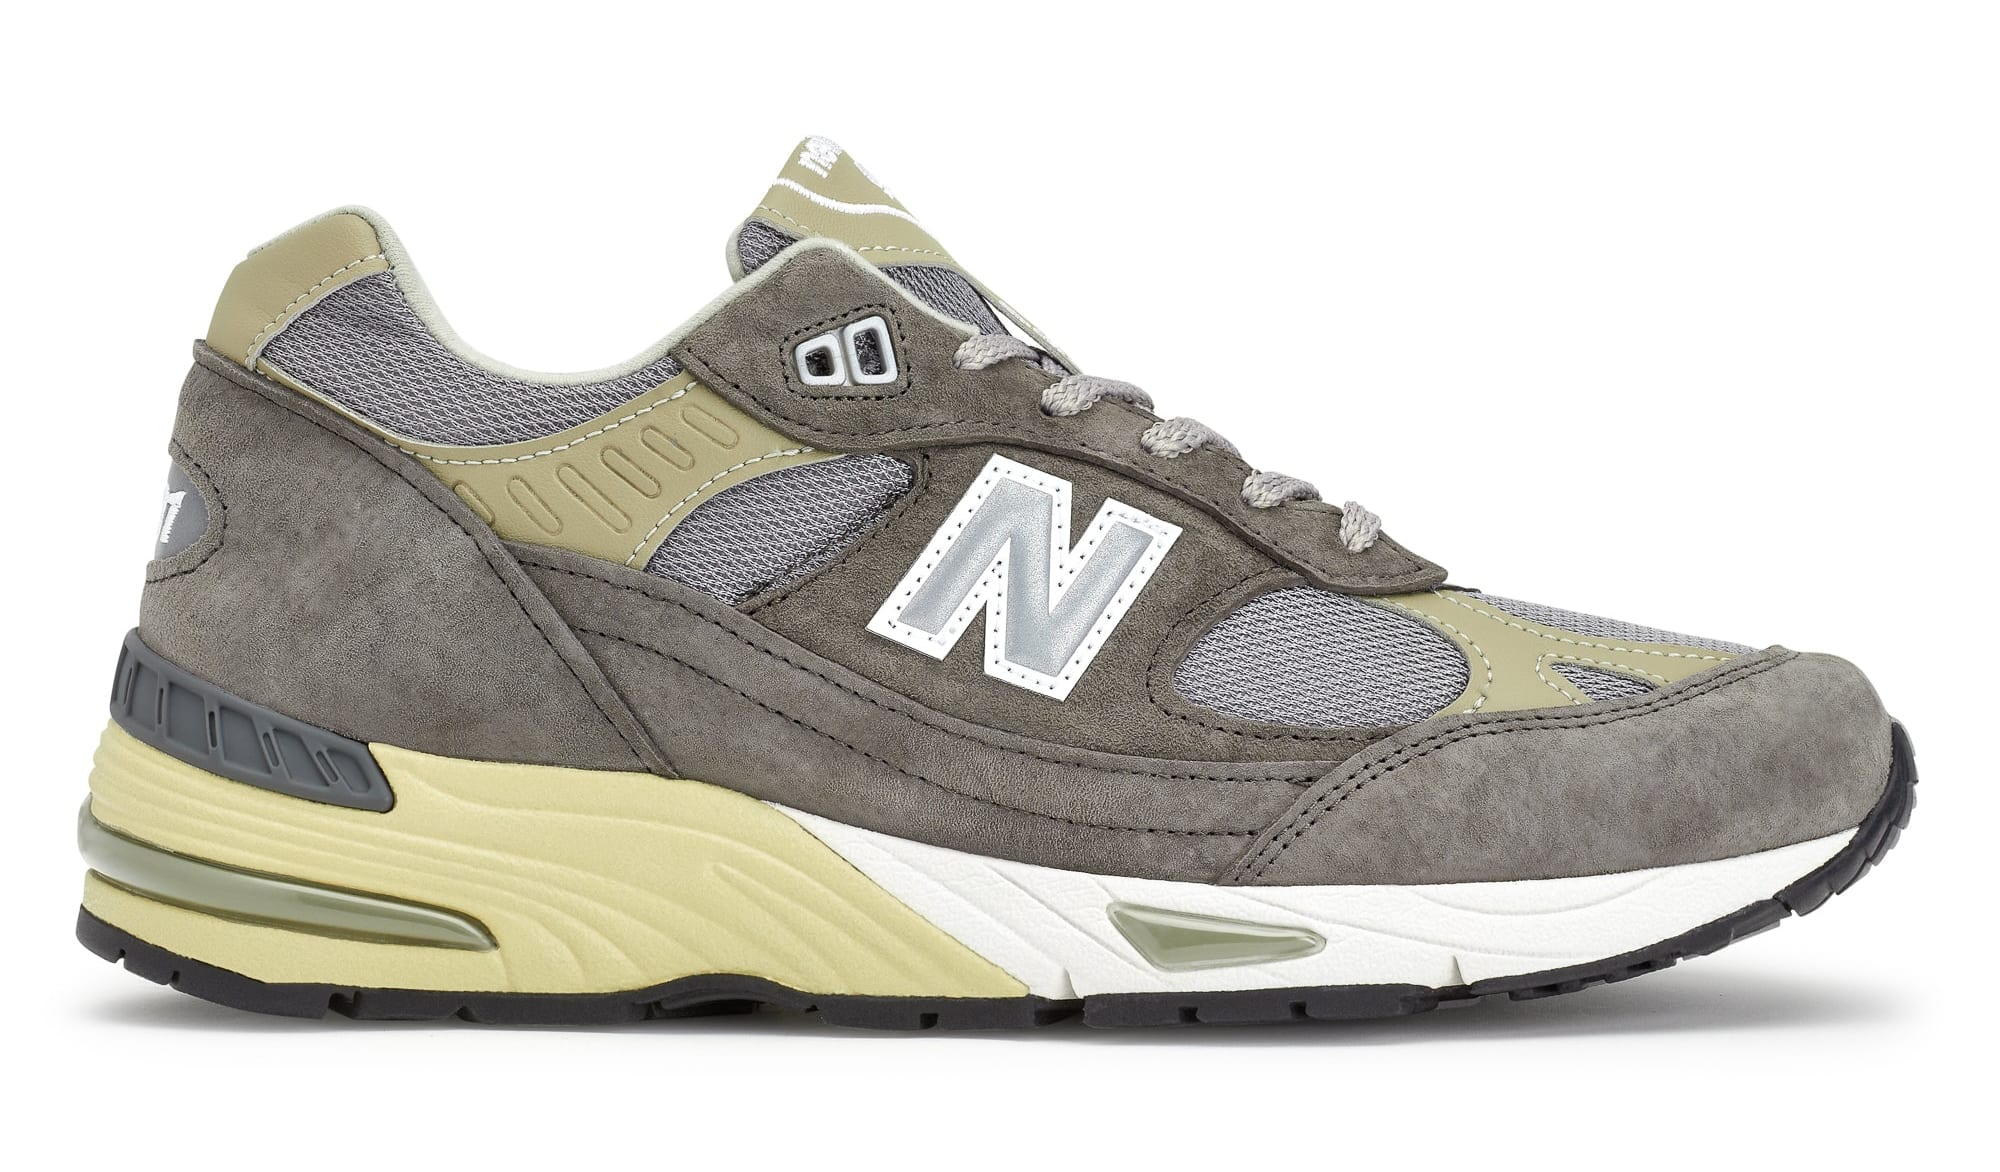 Dover Street Market x New Balance 991 Lateral